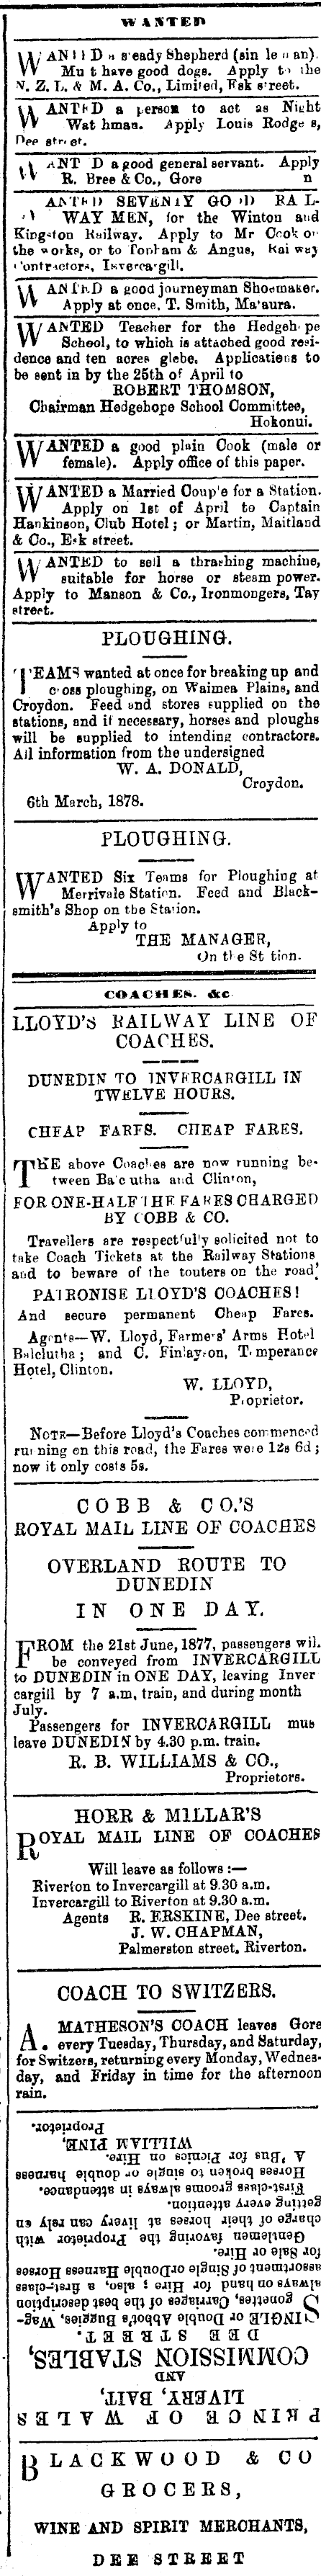 Papers Past | Newspapers | Southland Times | 2 April 1878 | Page 1  Advertisements Column 2